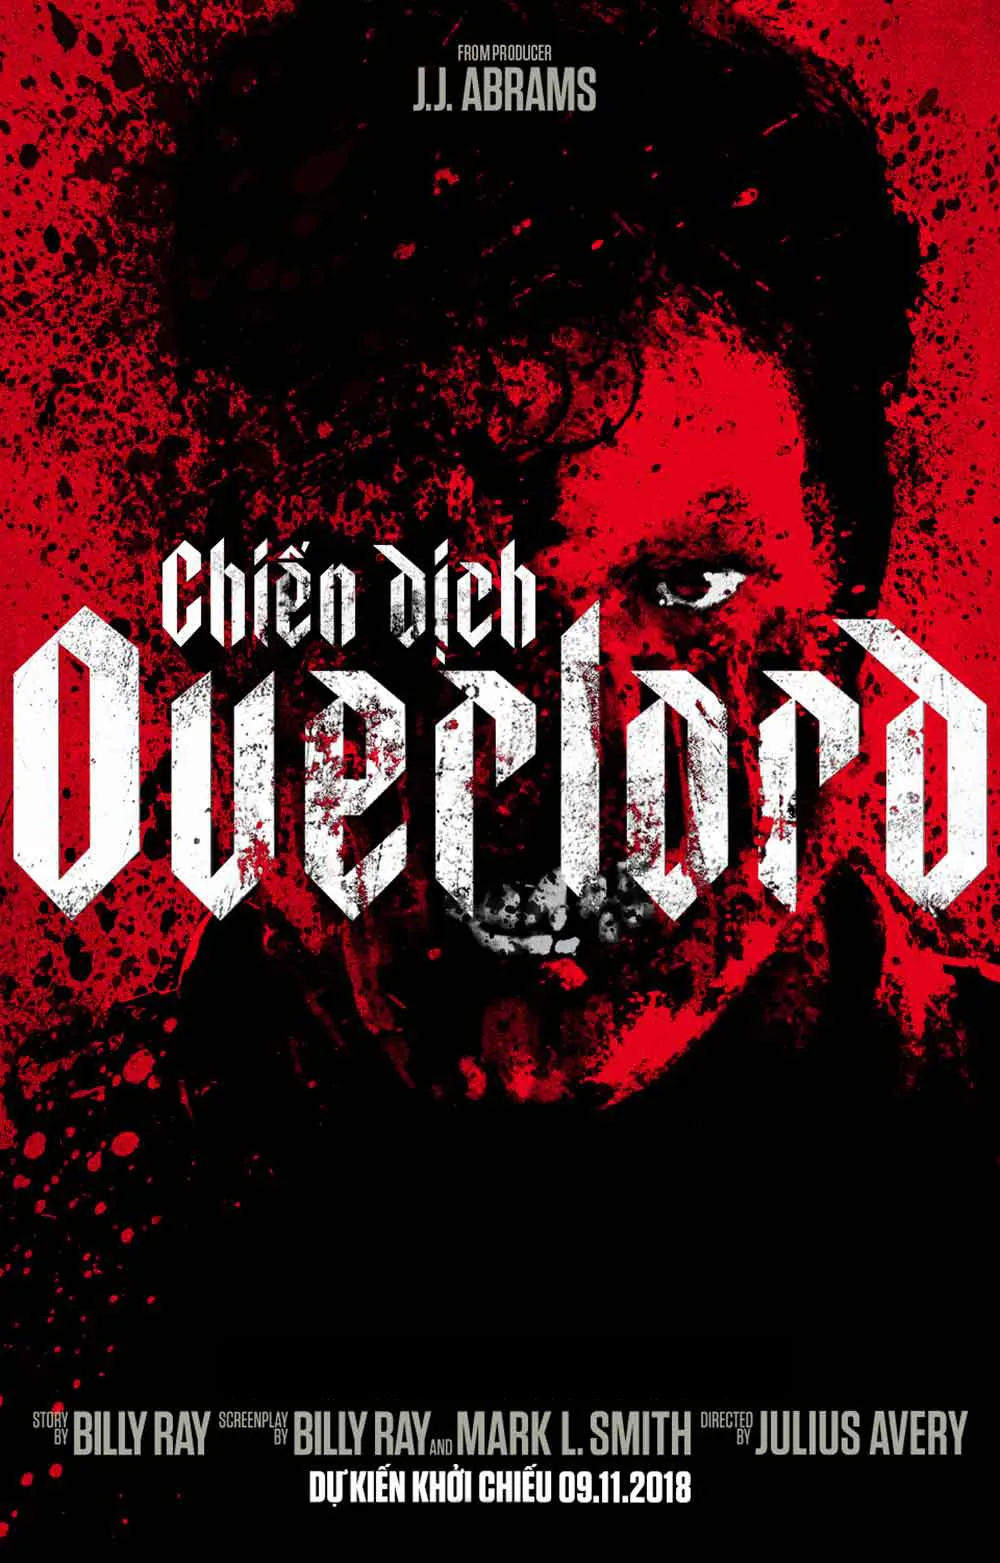 Chiến dịch Overlord